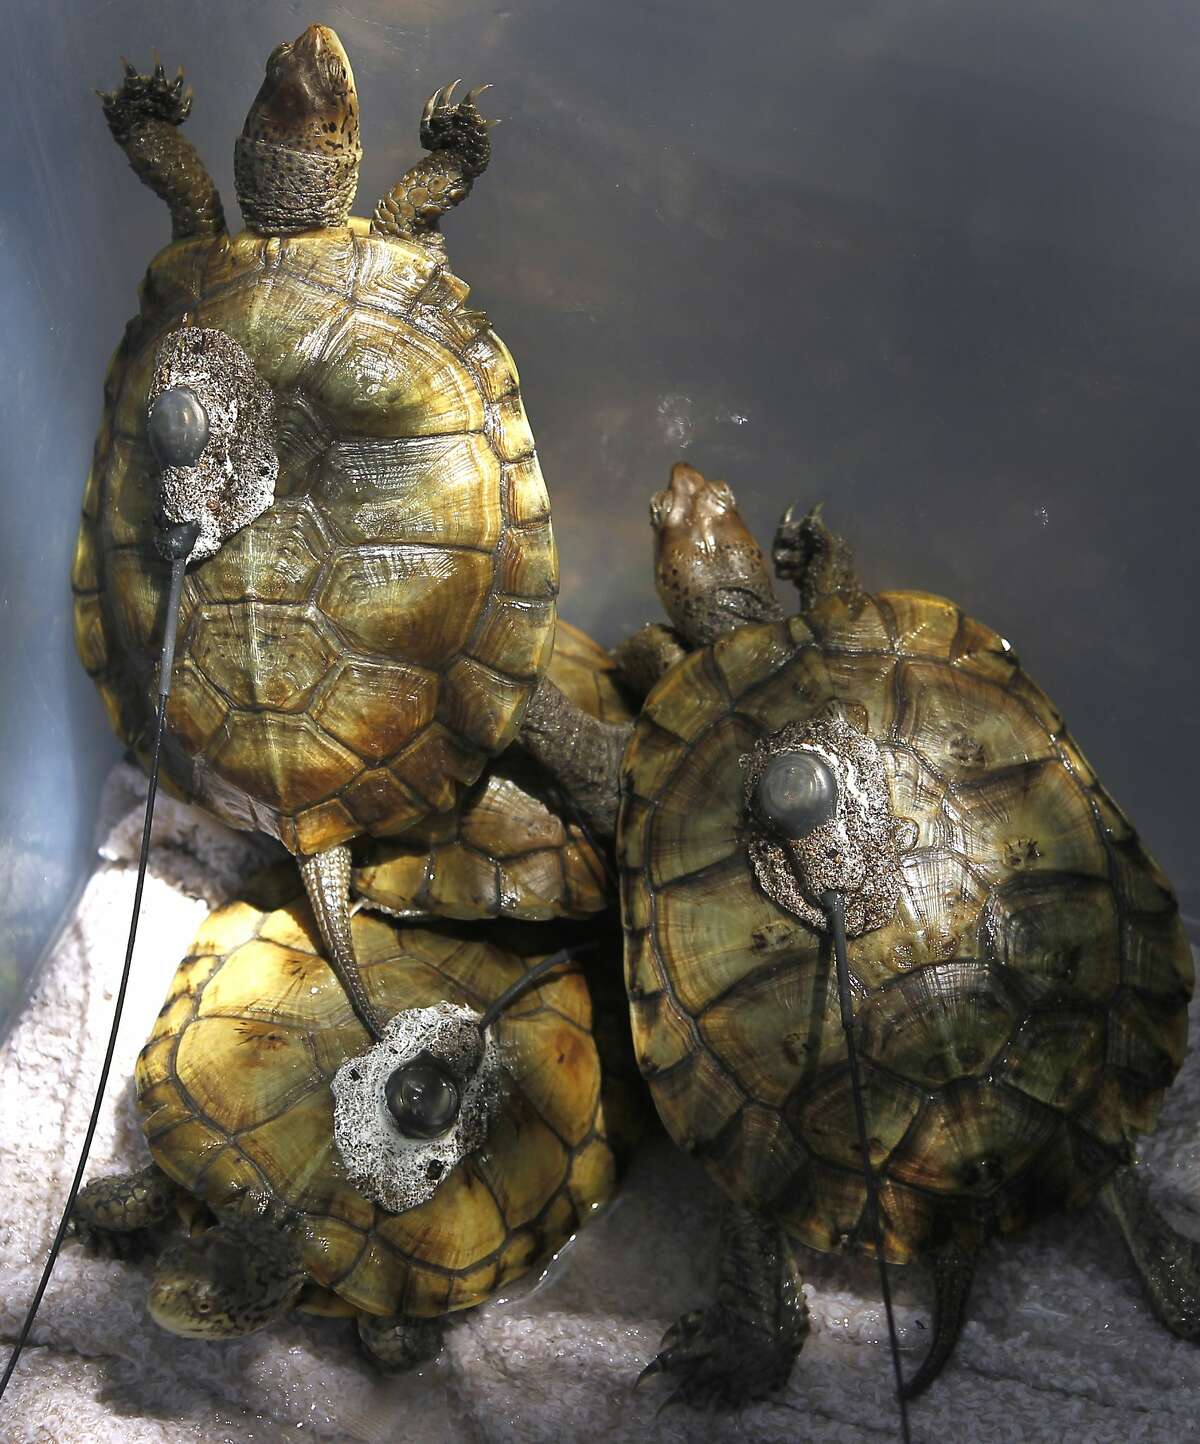 Western pond turtles, with radio transmitters affixed to their shells, can sense that freedom is near before they're released into Mountain Lake in San Francisco, Calif. on Saturday, July 18, 2015. Researchers from Sonoma State University, the Presidio Trust and the San Francisco Zoo reintroduced 28 turtles into the lake as part of an ongoing effort to repopulate the habitat with native species.